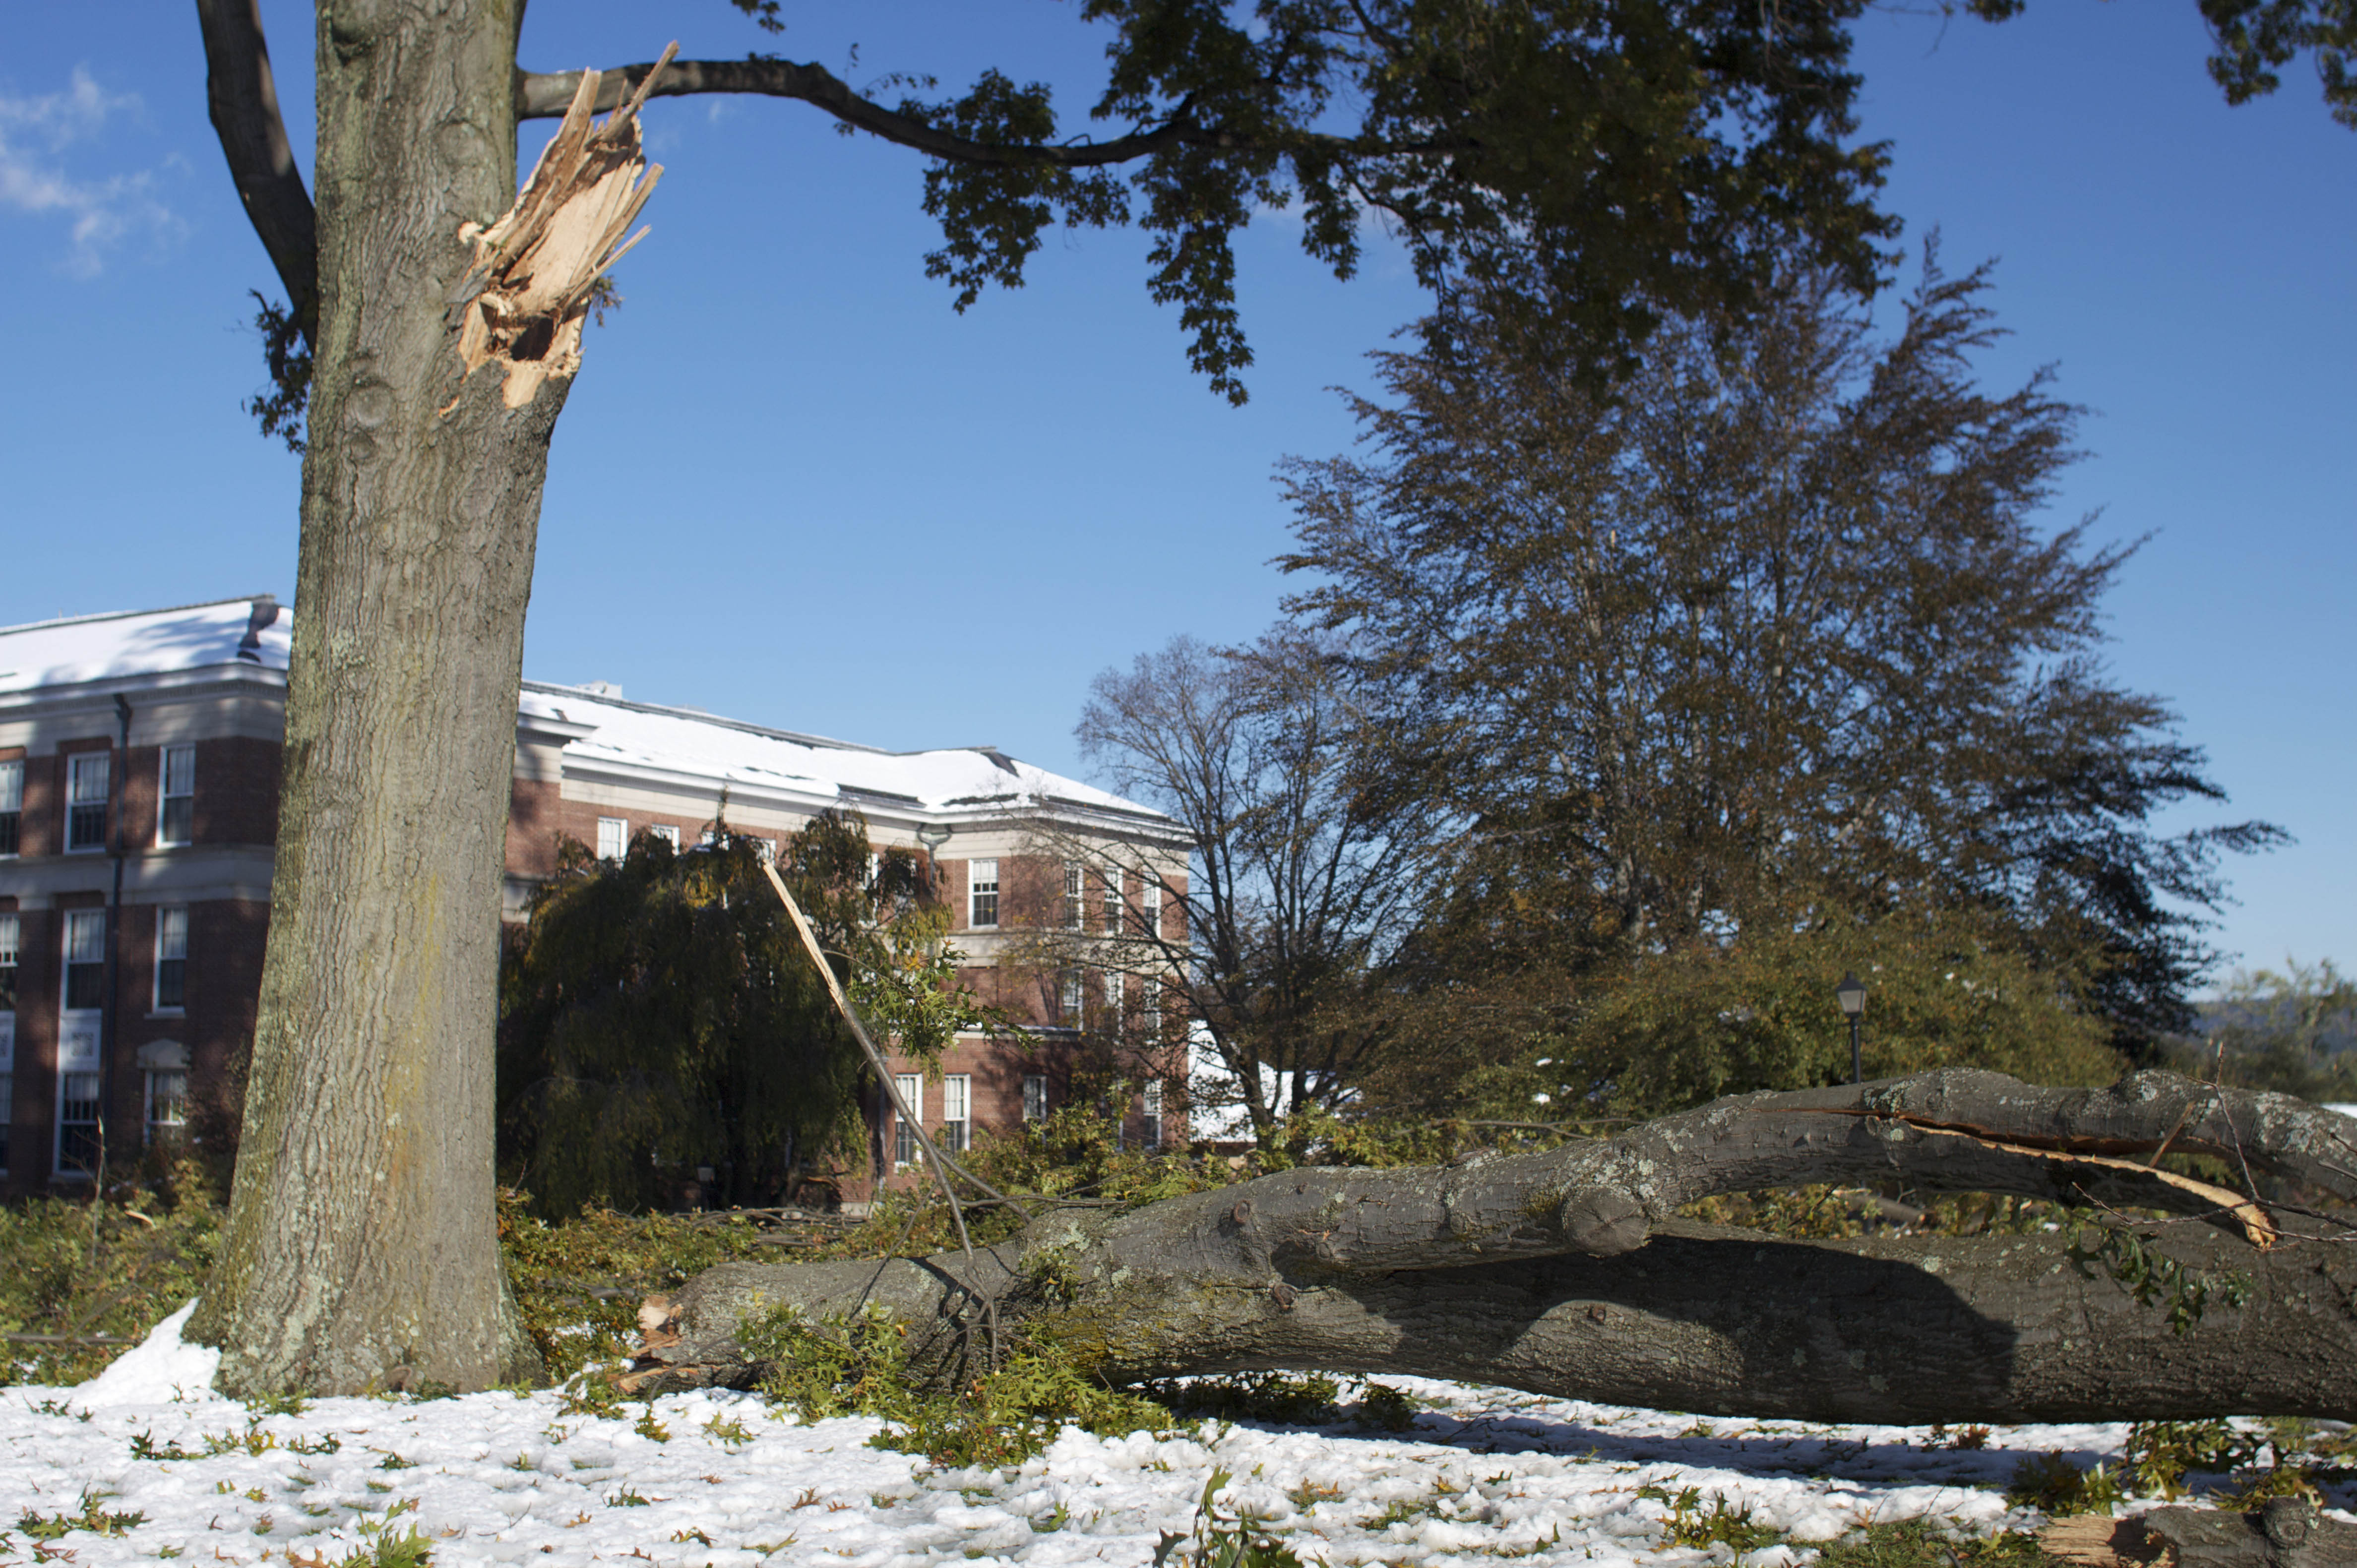 The snowstorm tattered many of the trees on campus, leaving most of the quads in